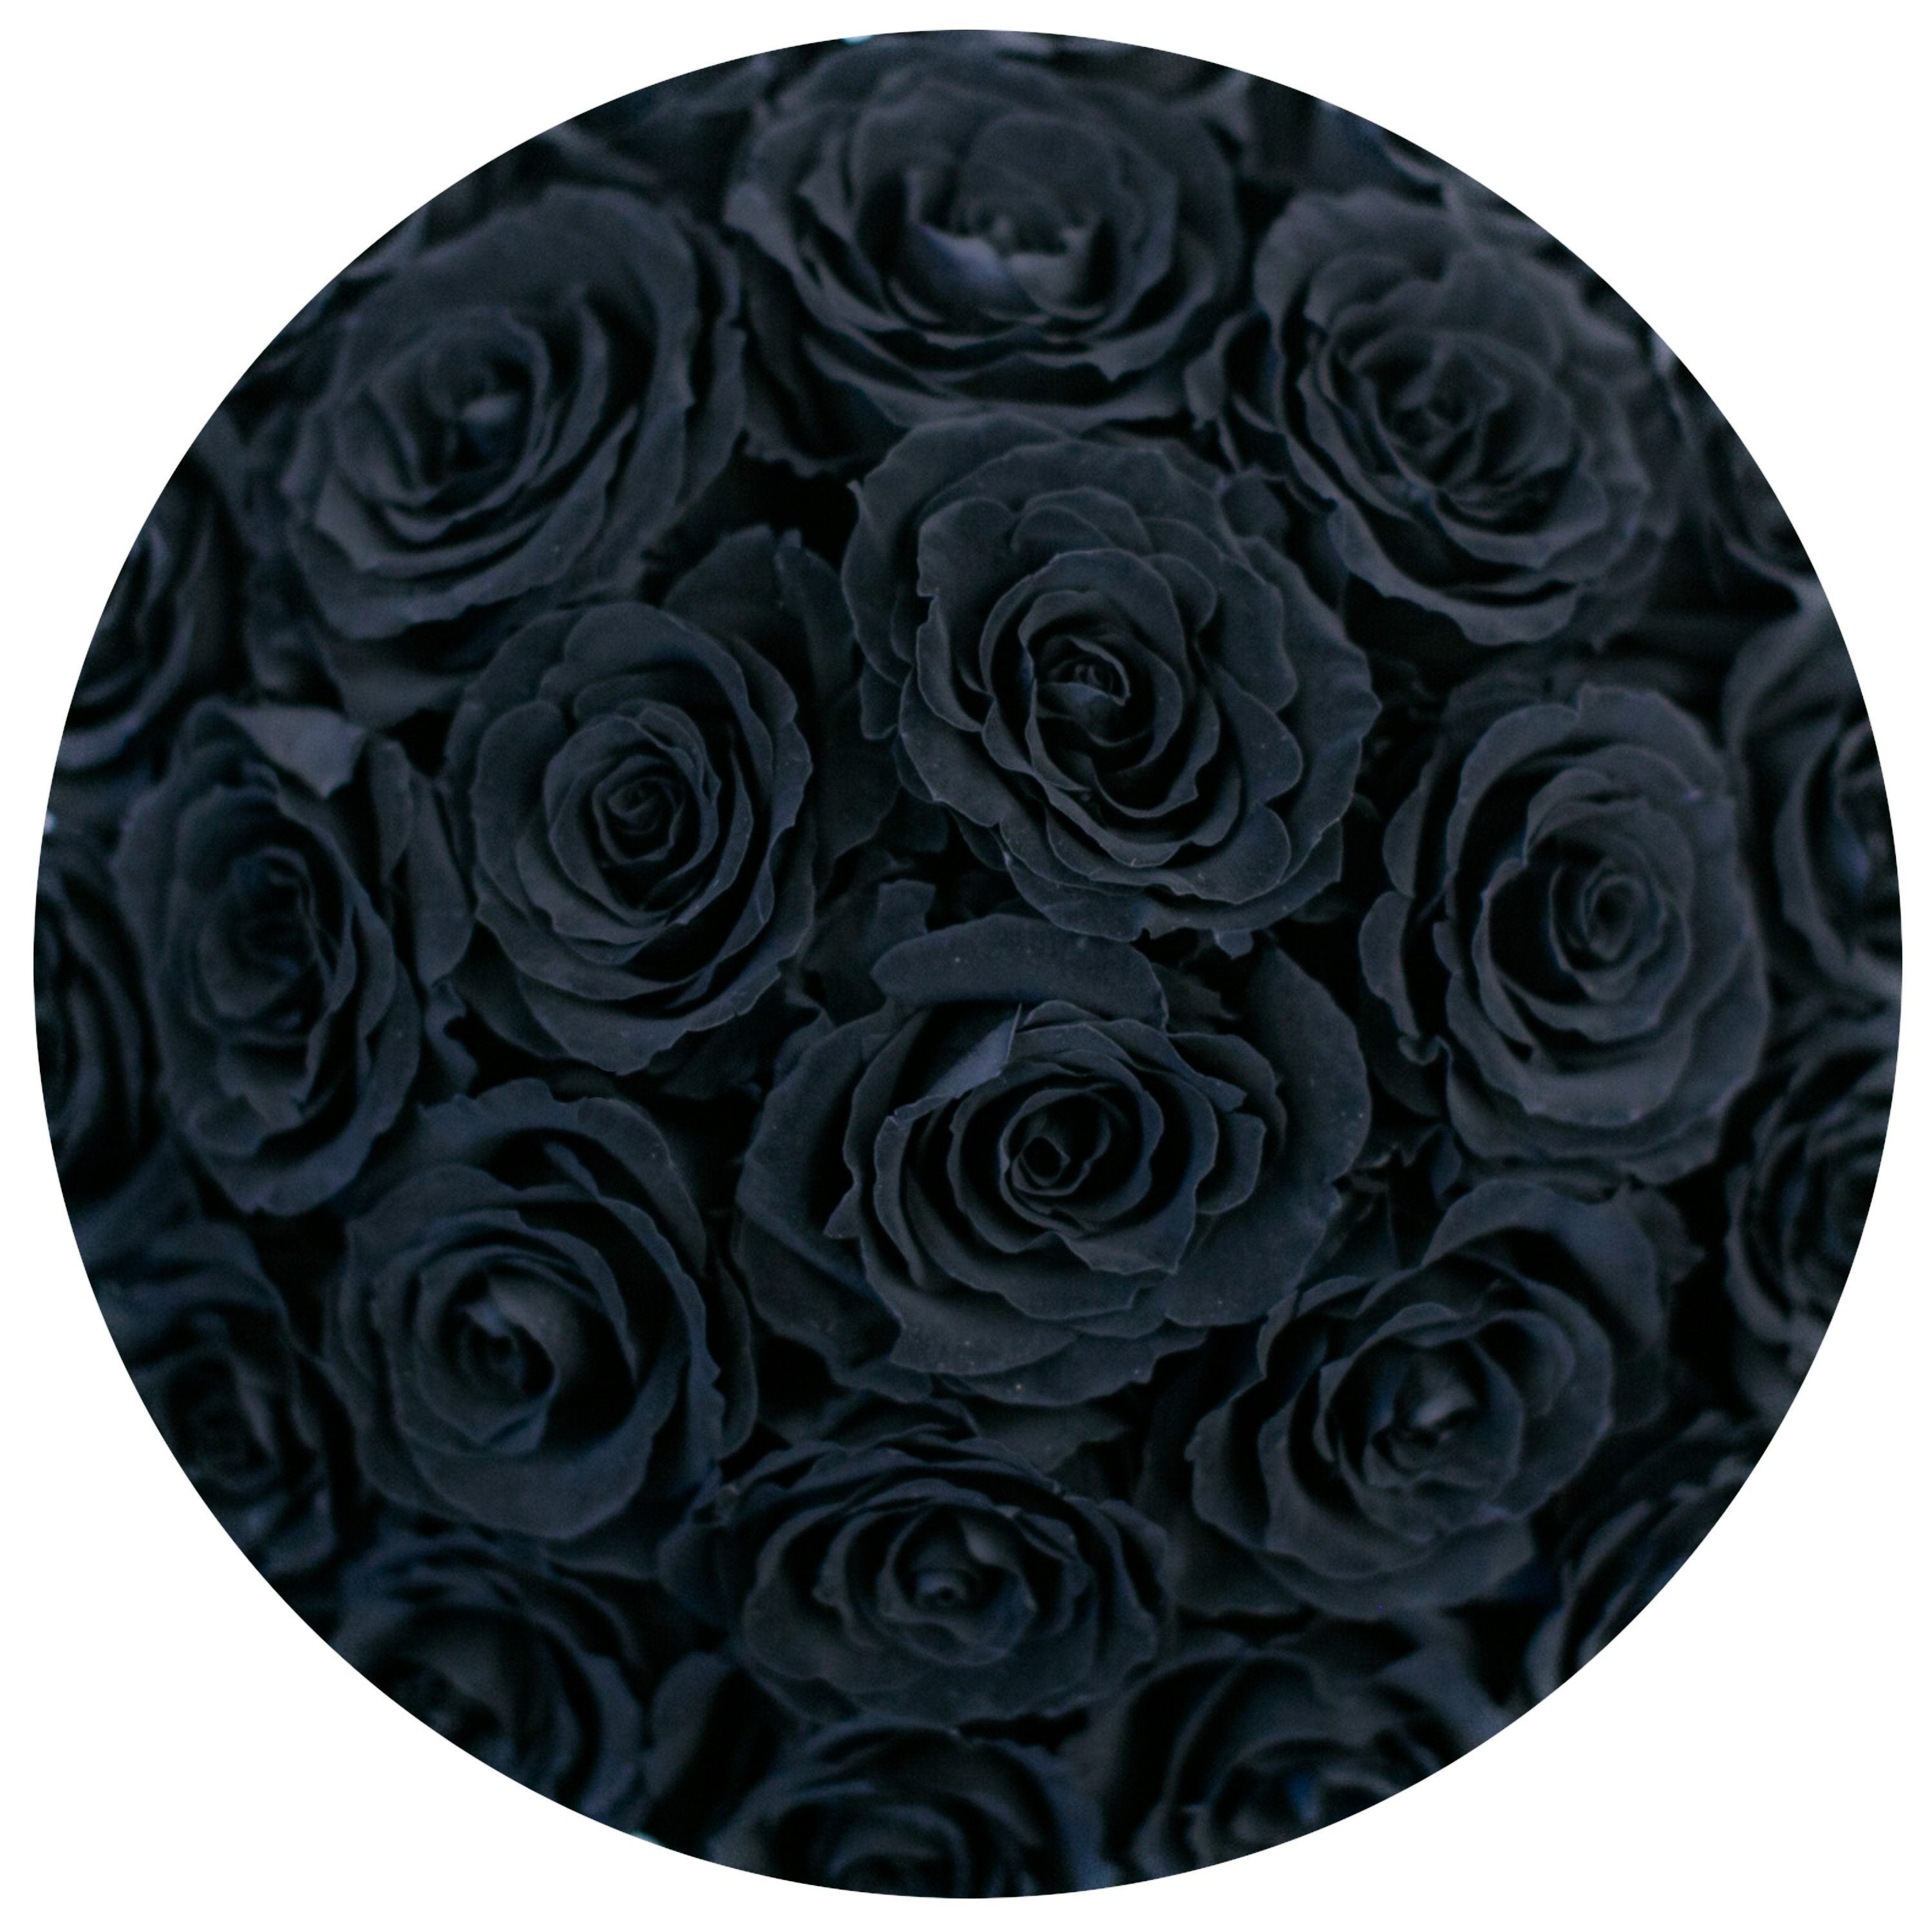 classic round box - hot-pink suede box - black roses ( dome ) black eternity roses - the million roses